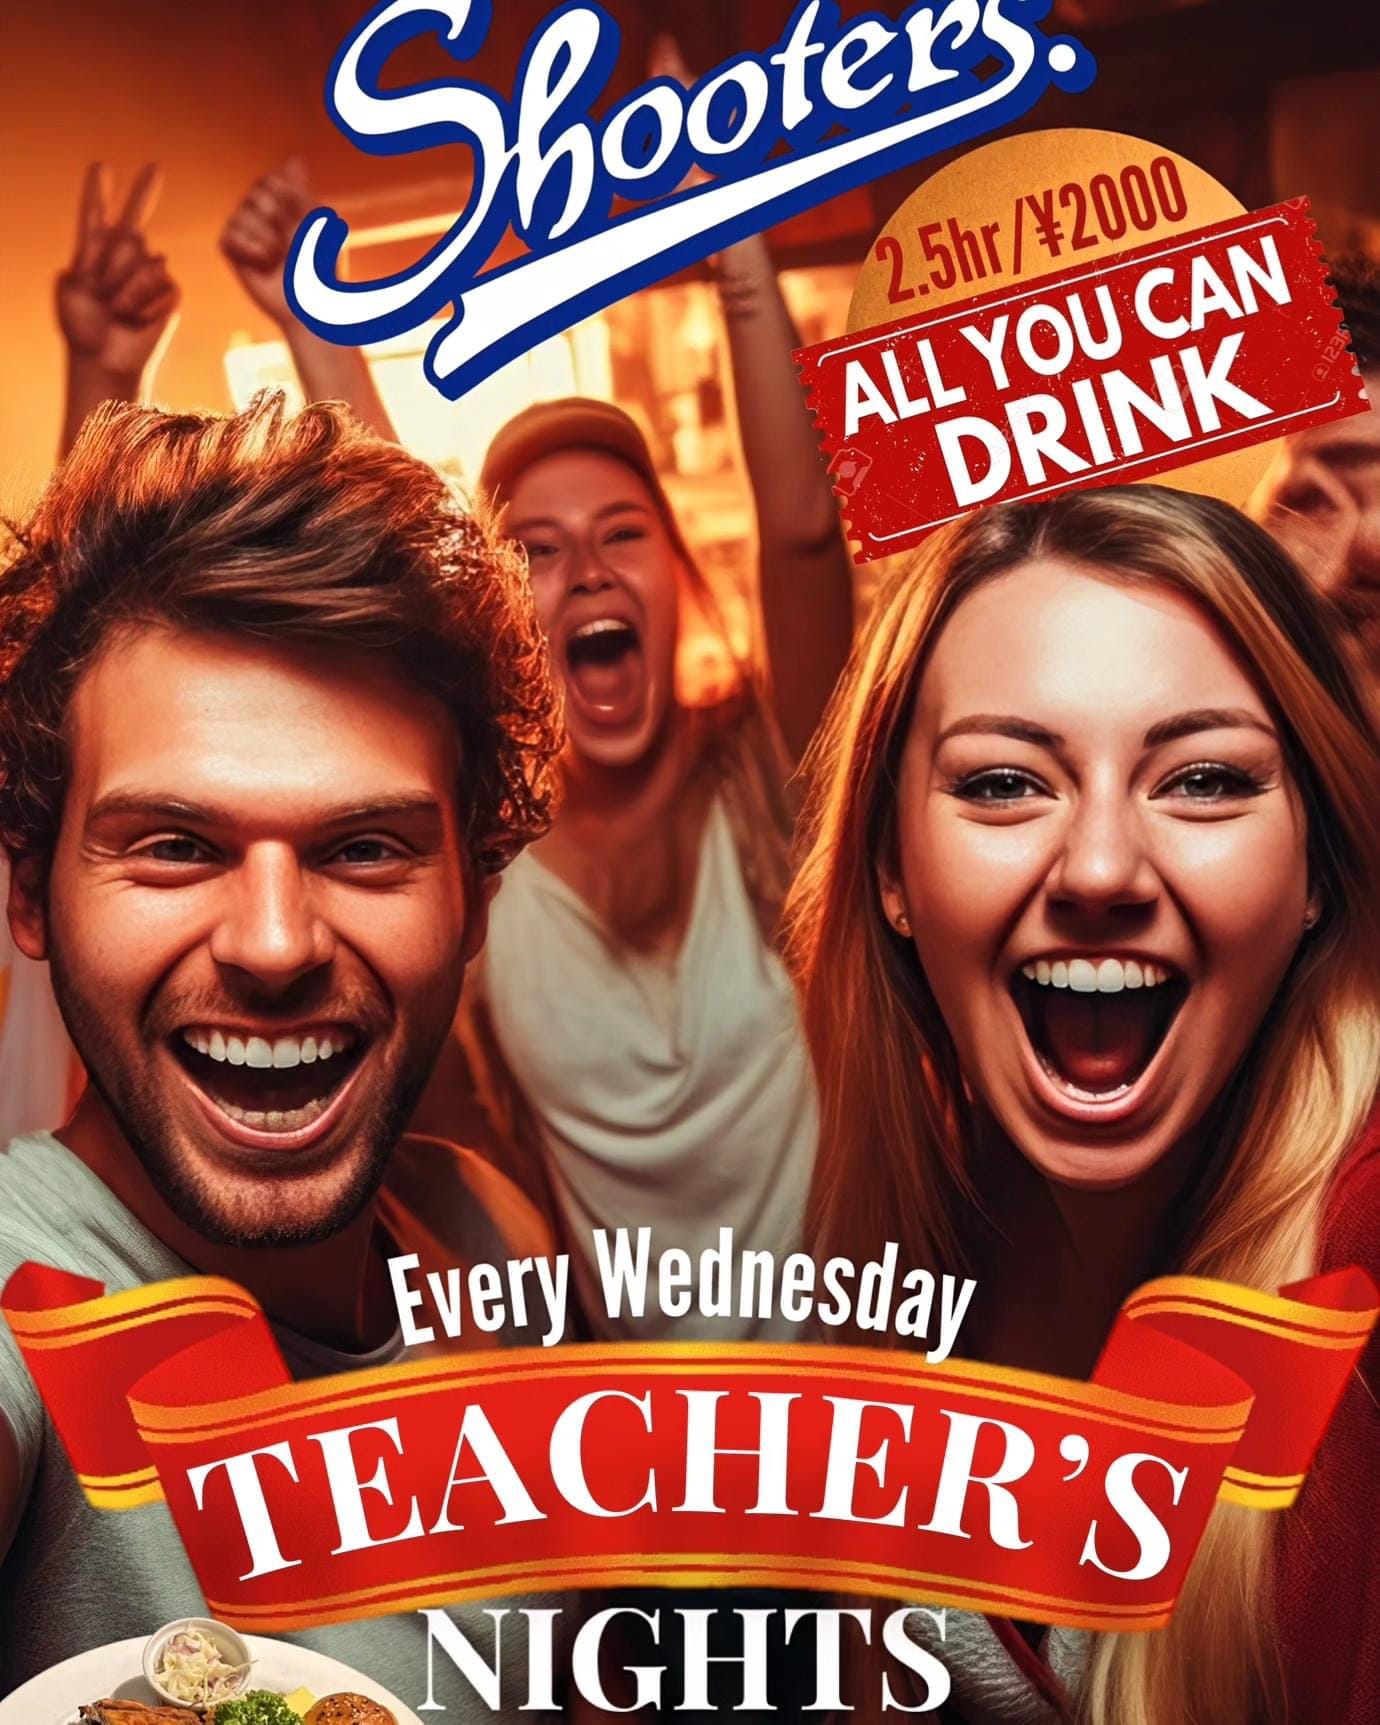 Wednesday is Teachers' Night at Shooters!